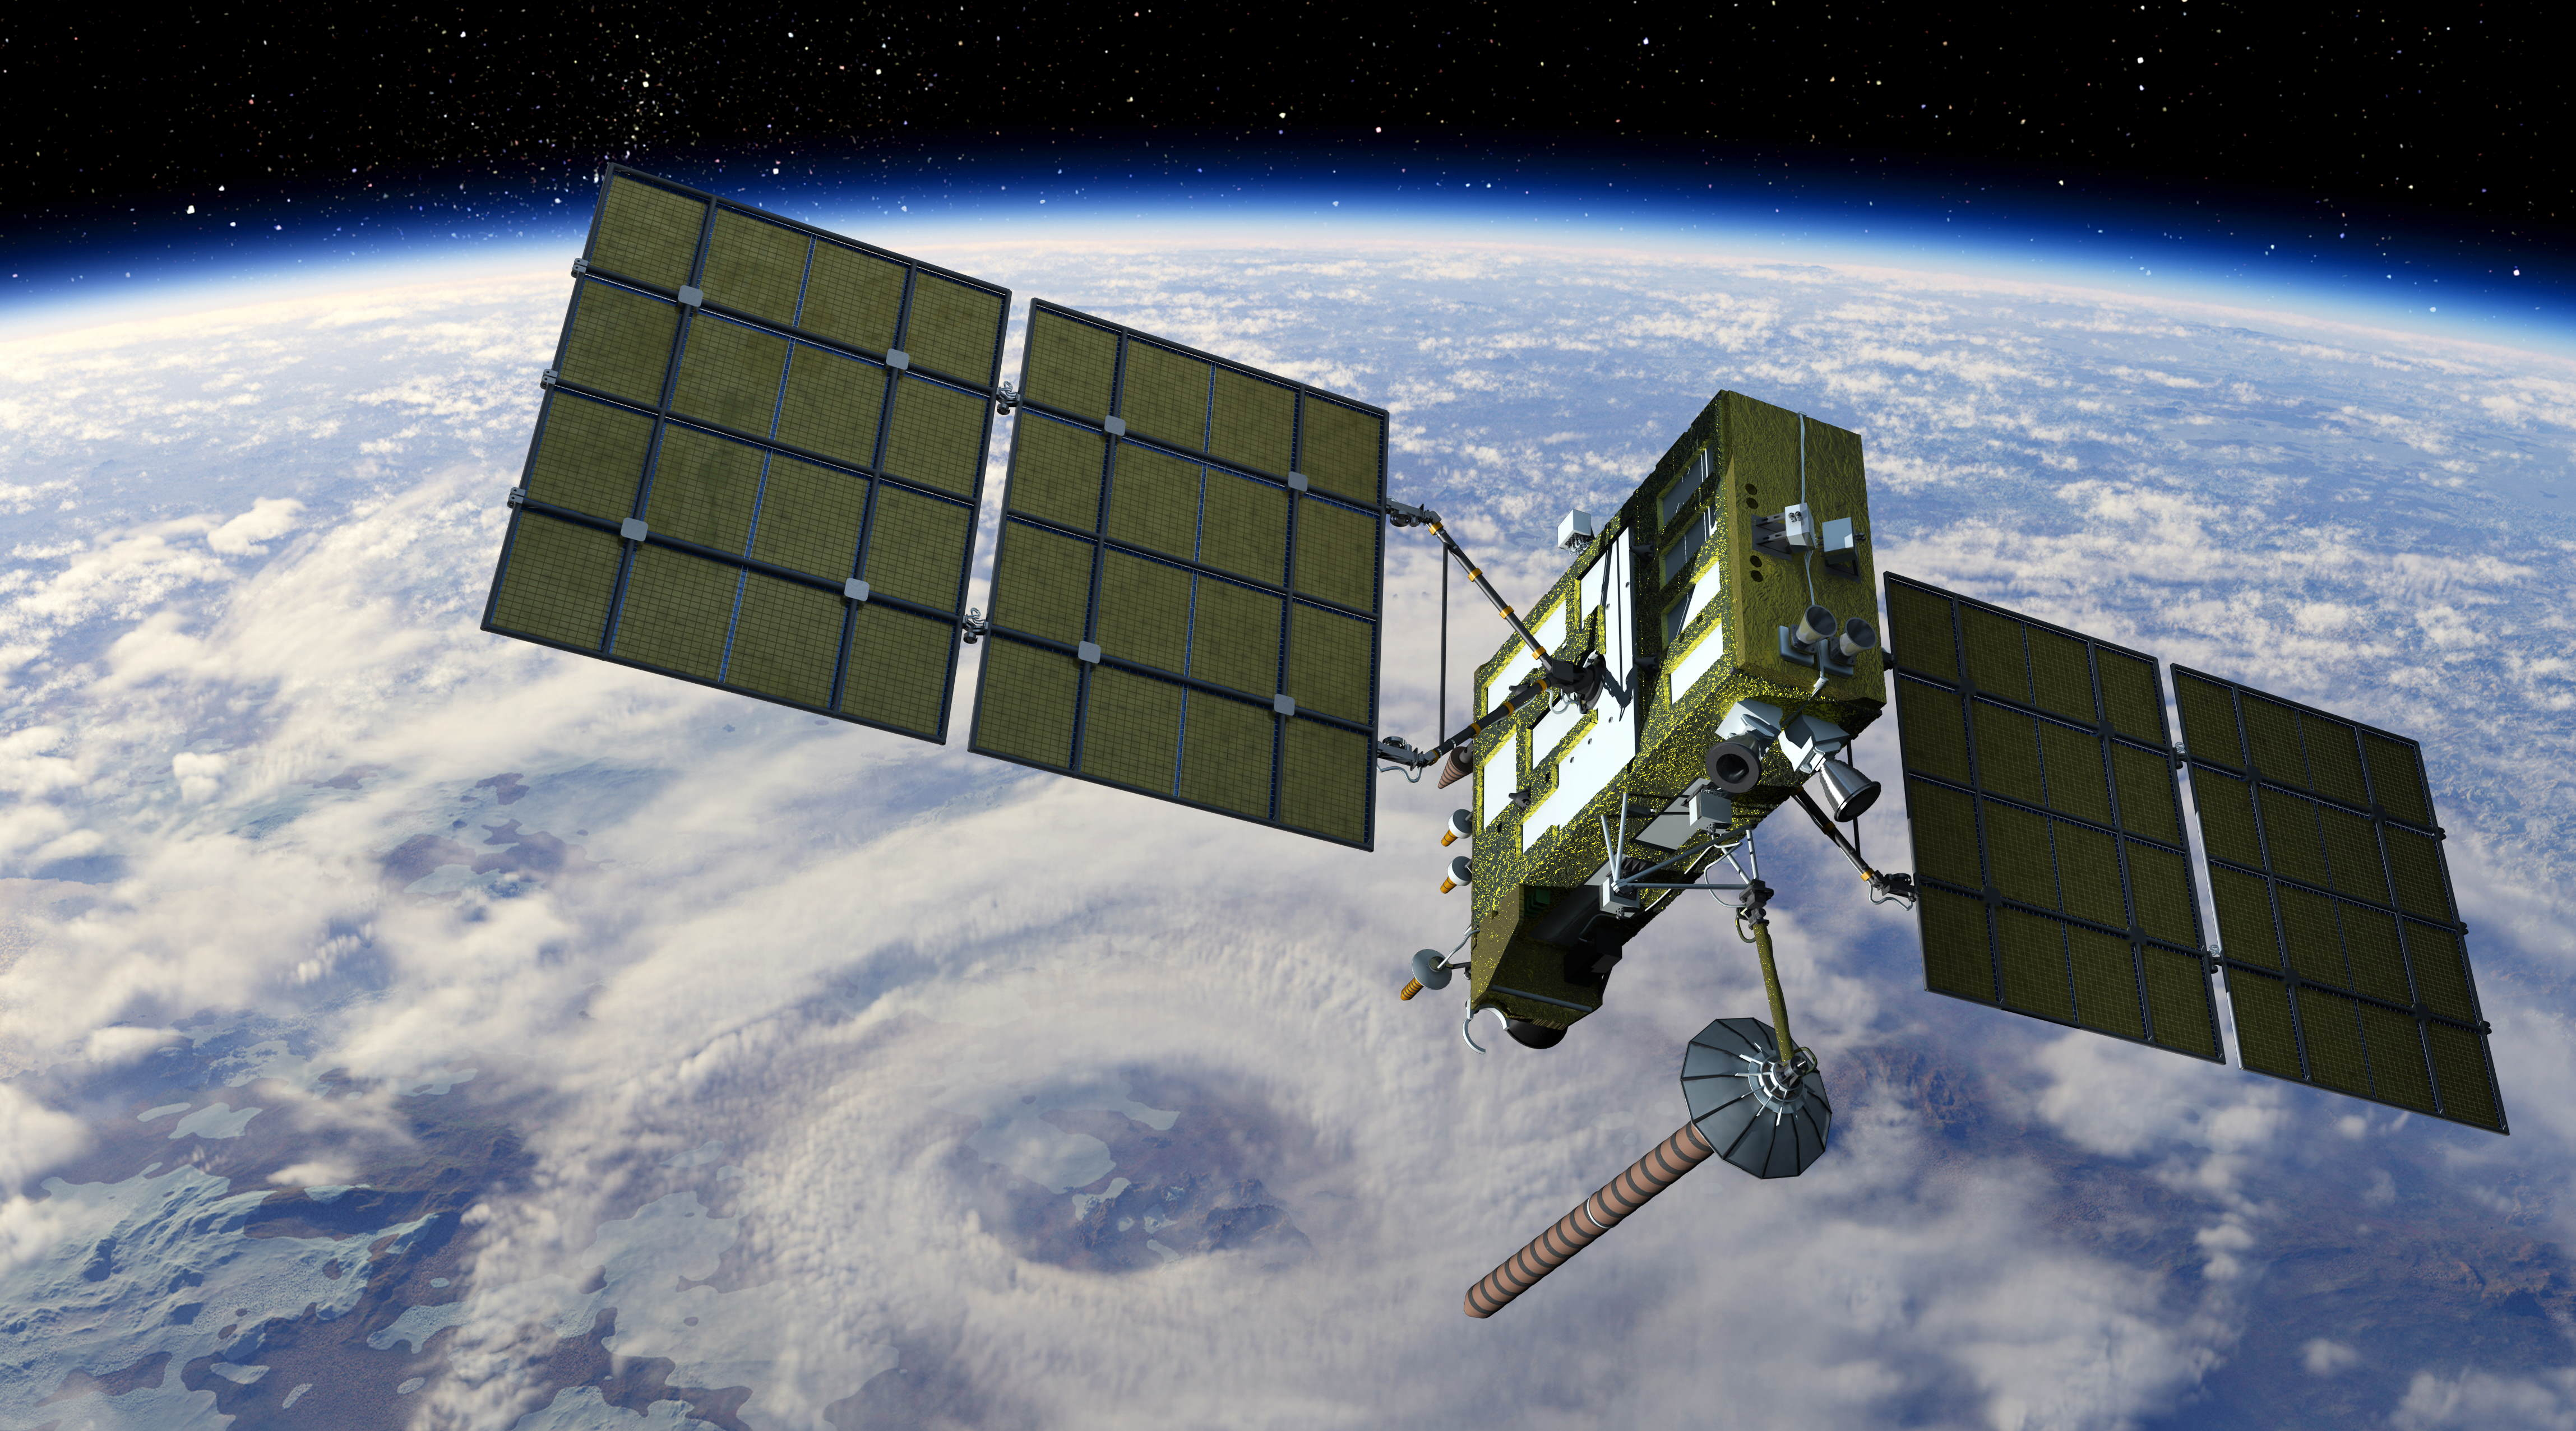 Image of satellite with solar arrays against a backdrop of the earth and cloud patterns.